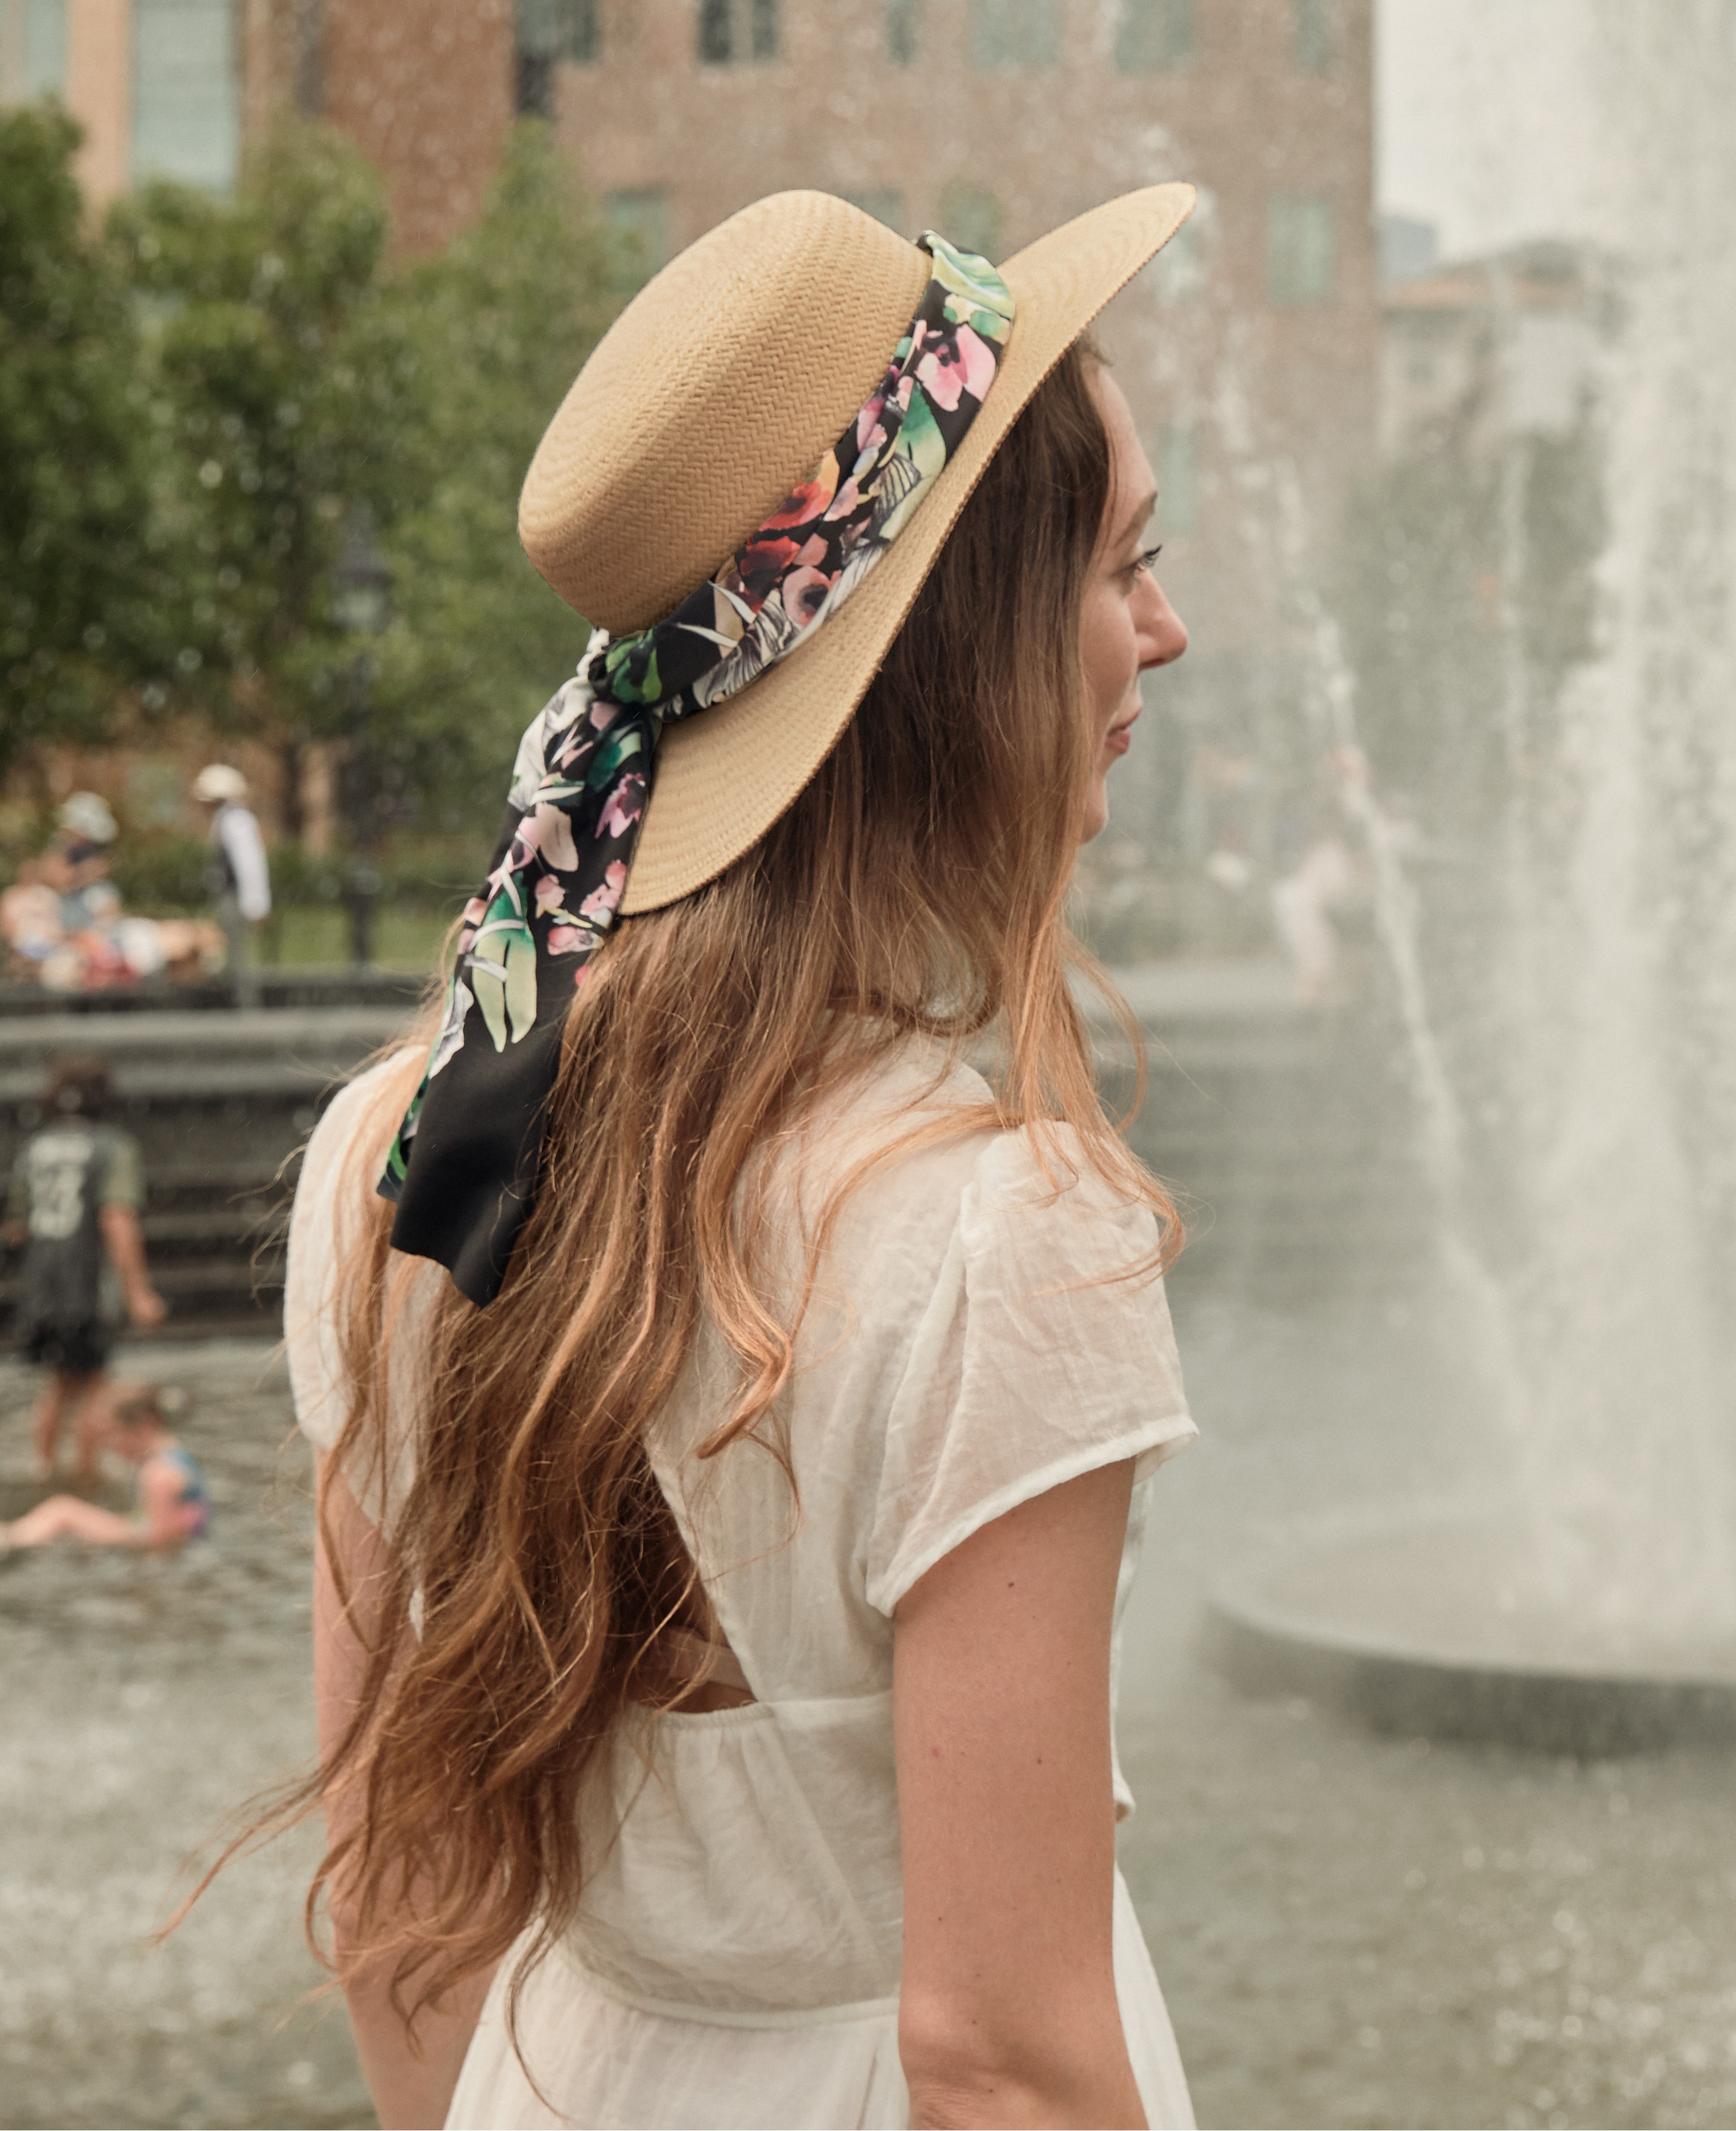 The Packable Custom Straw Beach Hat Wyldaire